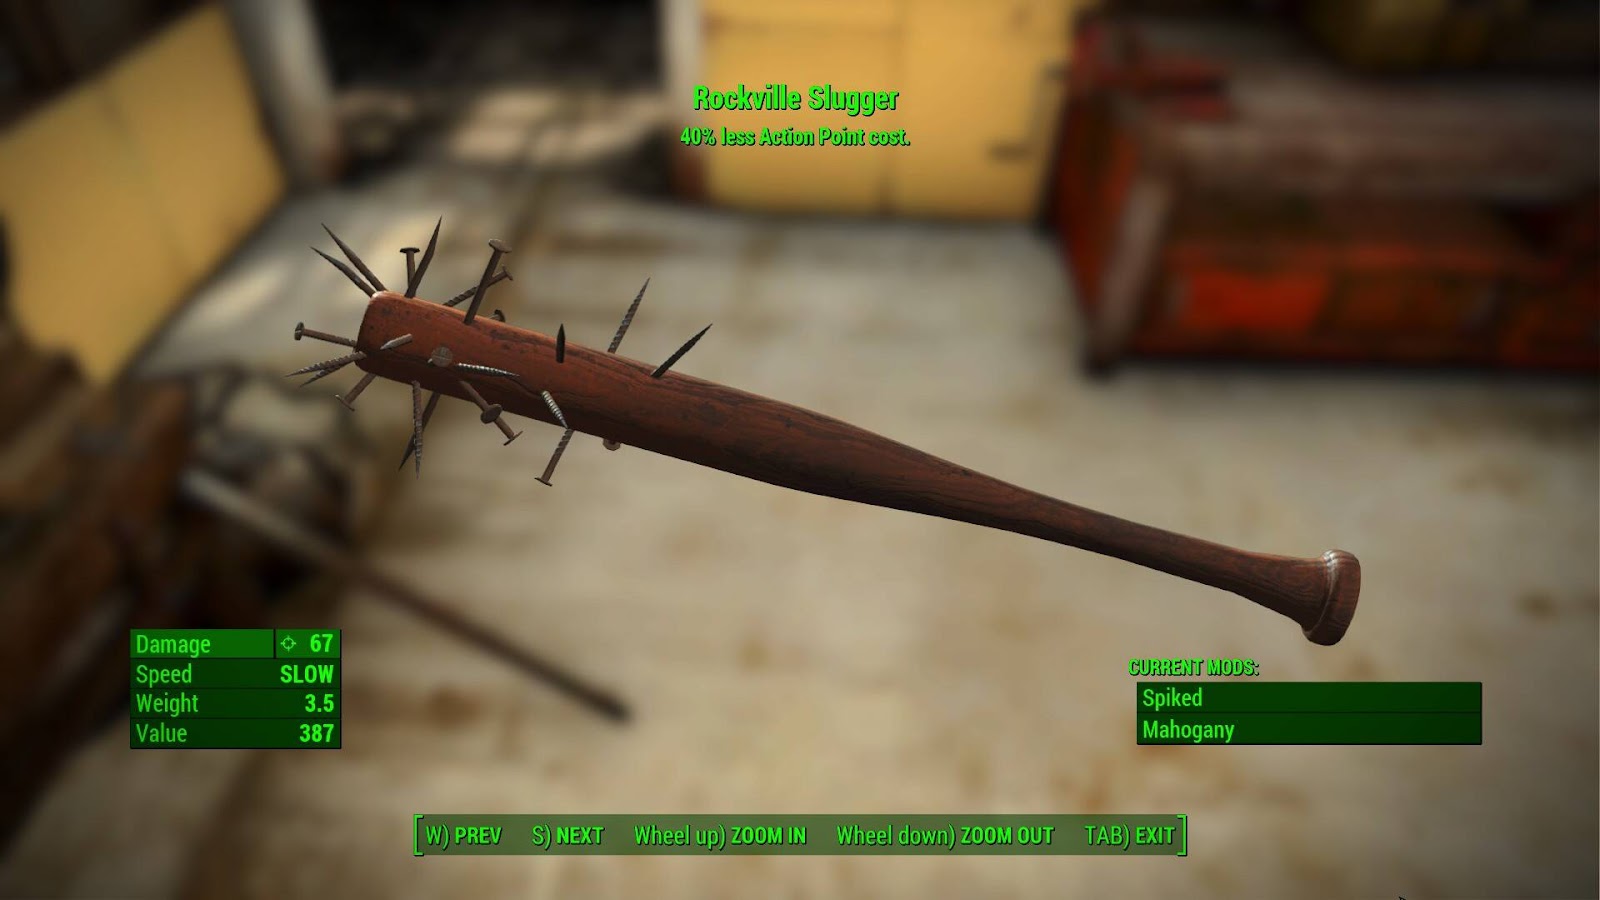 The Rockville Slugger, a mahogany baseball bat with multiple nails driven into the head, viewed through the inventory UI of Fallout 4.